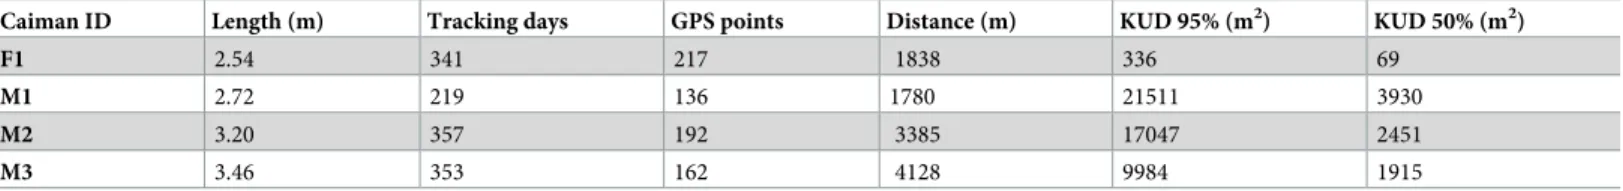 Table 1. Summary statistics describing the movement patterns of the one female (F1) and three male (M1-M3) black caimans fitted with satellite transmitters.